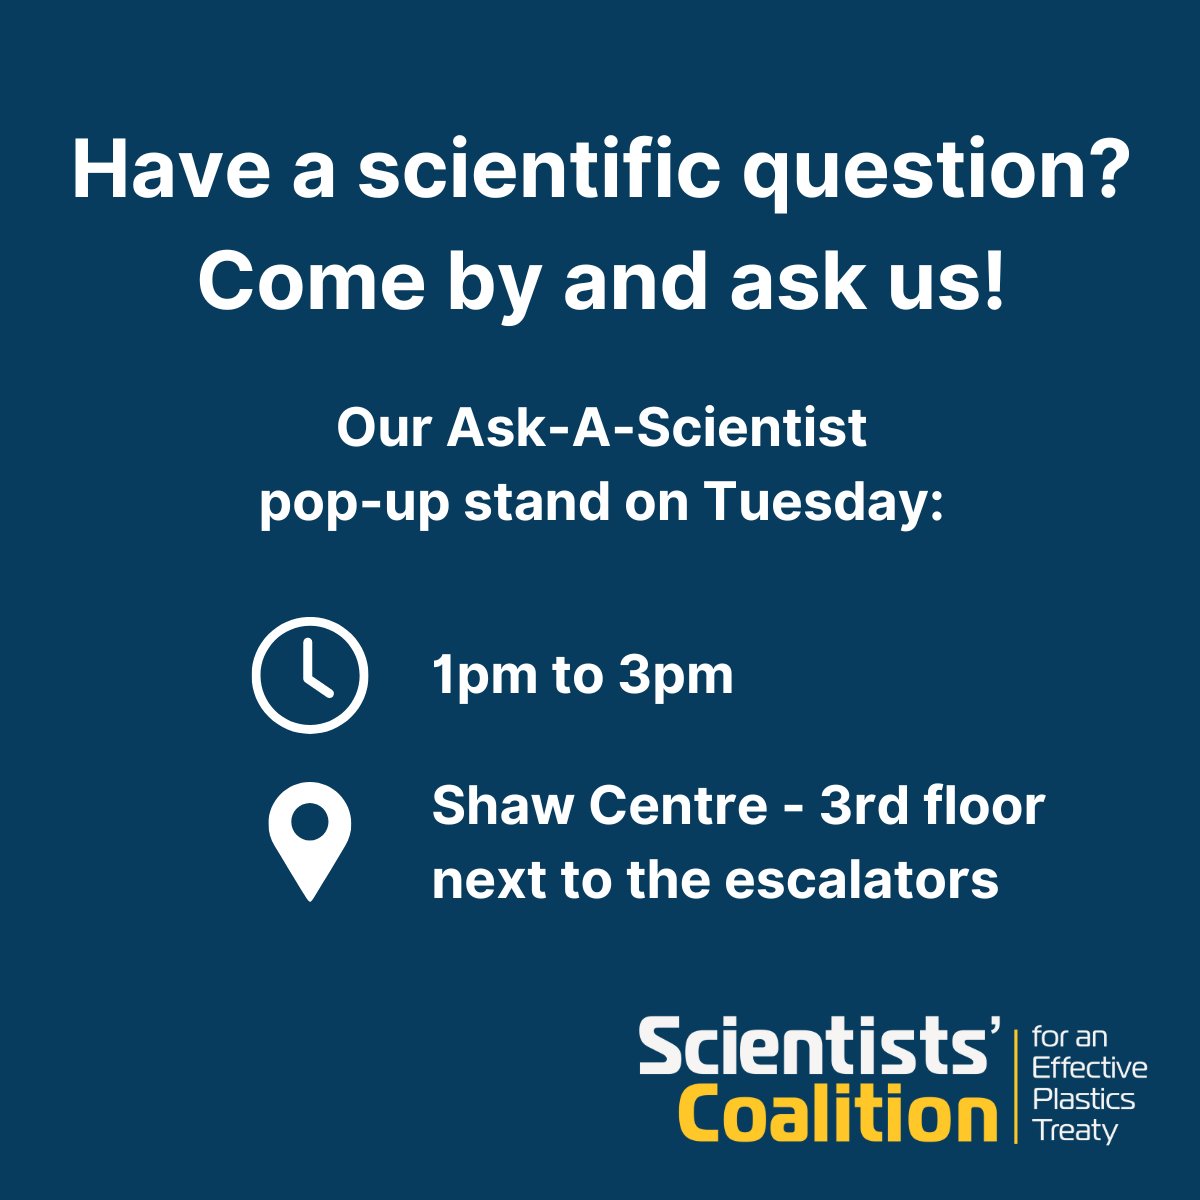 🙋🏽 Are you at INC-4 and have a scientific question? Come ask us in person! We will be hosting an Ask-A-Scientist pop-up stand each day! 👋 On Tuesday, our scientists will be available on the 3rd floor of the Shaw Centre near the escalators during the lunch break from 1pm to 3pm.